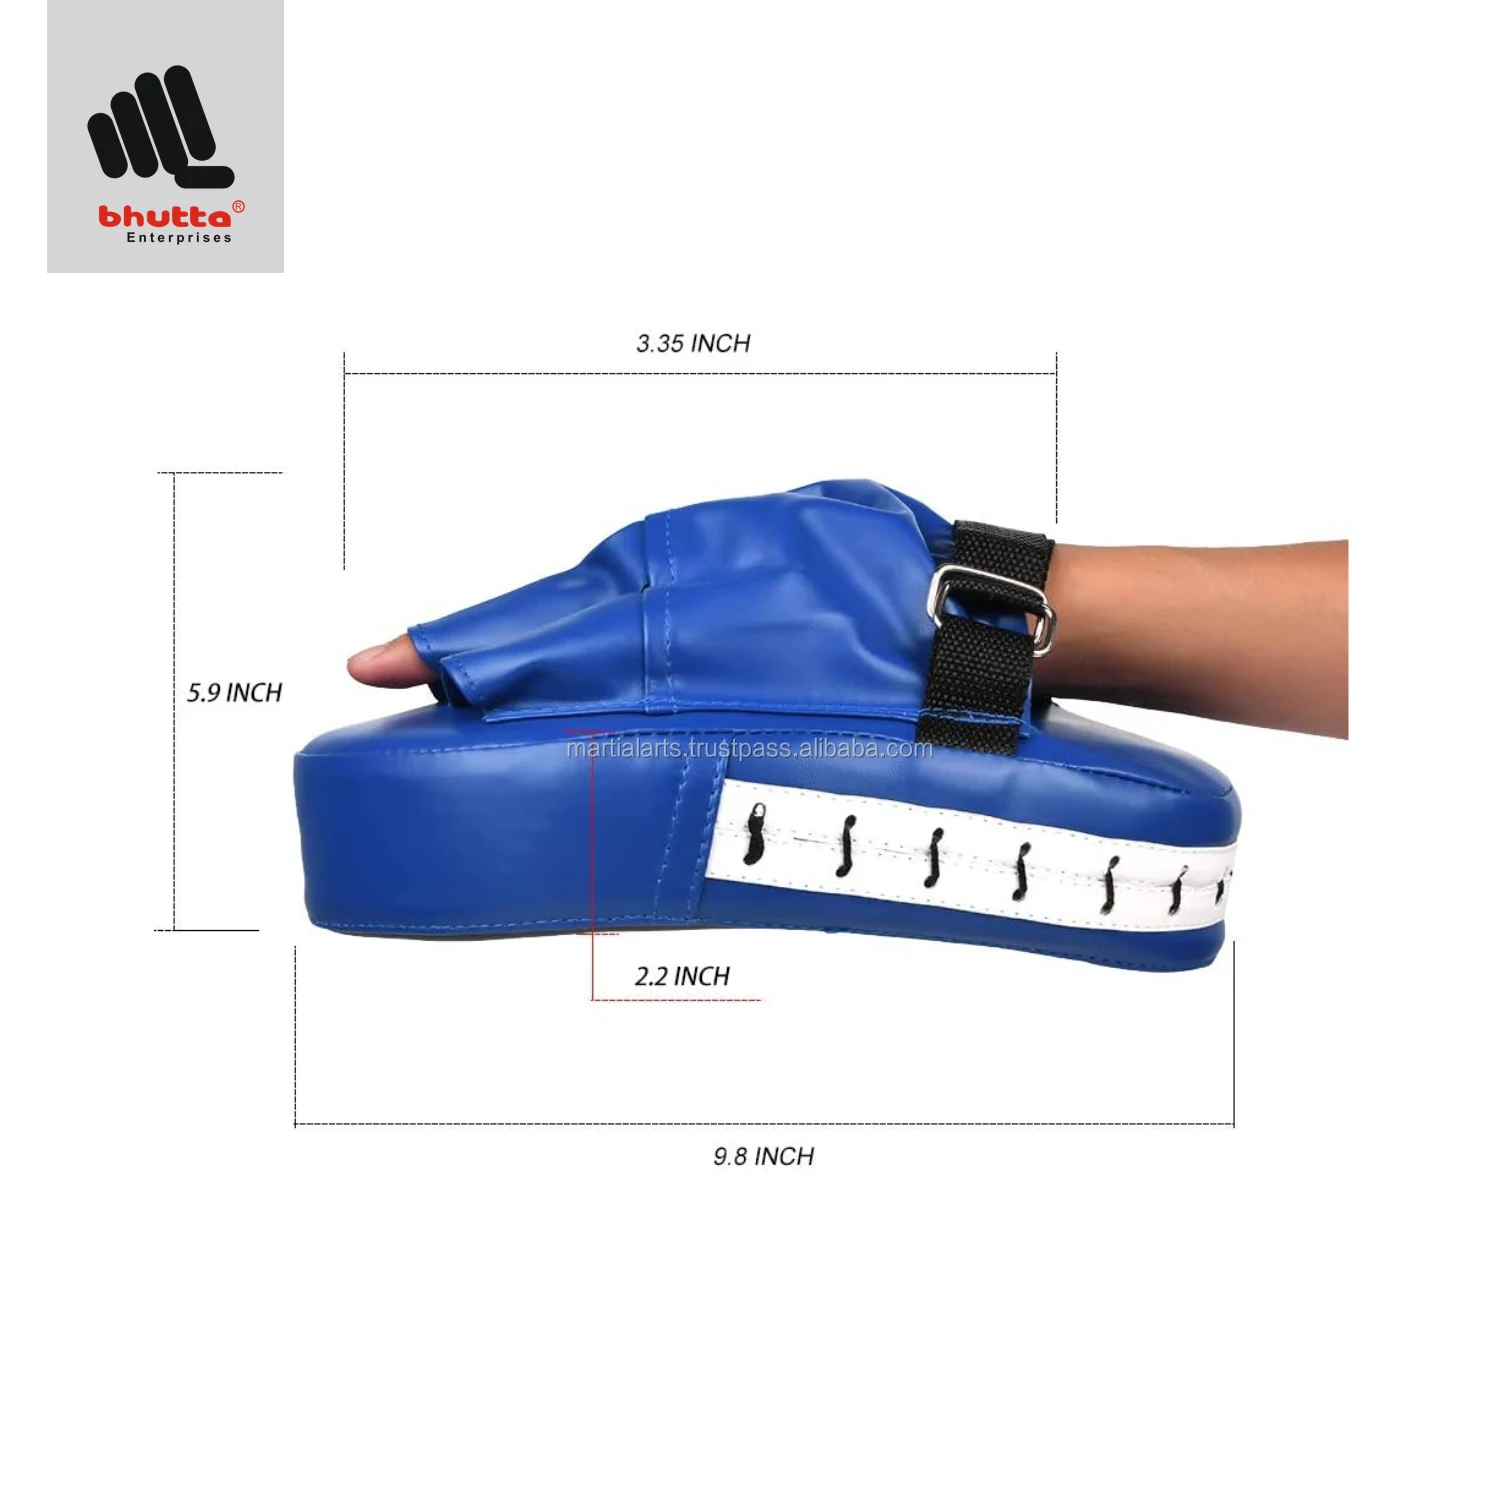 Punching Mitts Kickboxing Training Punch MMA Boxing Mitts Hand Target Focus Pads 